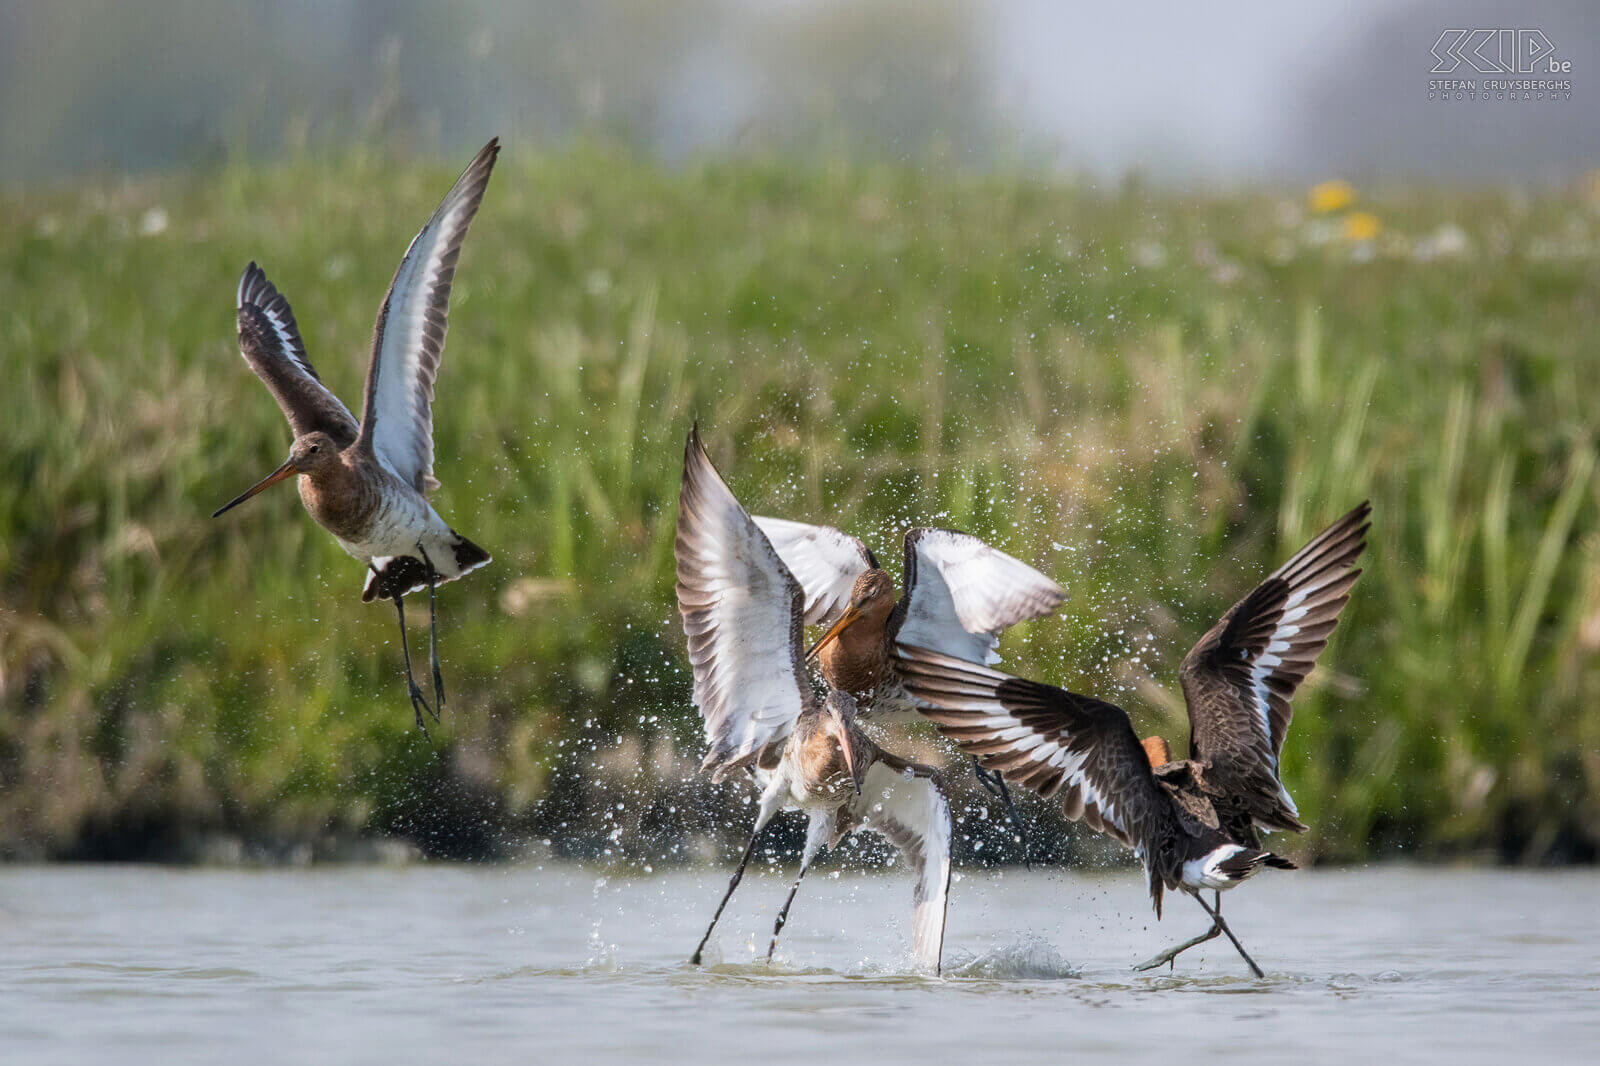 Black-tailed godwits The Black-tailed godwit (Limosa limosa) is a beautiful wader and a meadow bird par excellence. They hibernate in Africa, but they return to the Low Lands early in the spring. During the breeding season the godwit shows spectacular court flights. I was able to photograph them courting and mating in Friesland in the Netherlands.<br />
<br />
Half of all the Black-tailed godwits in Europe breed in the Netherlands. However, the population is under heavy pressure and, unfortunately, they are being pushed back to meadow bird reserves. This species is classified as Near Threatened on the IUCN Red List. Black-tailed godwits make an inconspicuous grass nest in meadowlands and lay an average of 3 to 4 eggs. They eat earthworms, insects and insect larvae. Stefan Cruysberghs